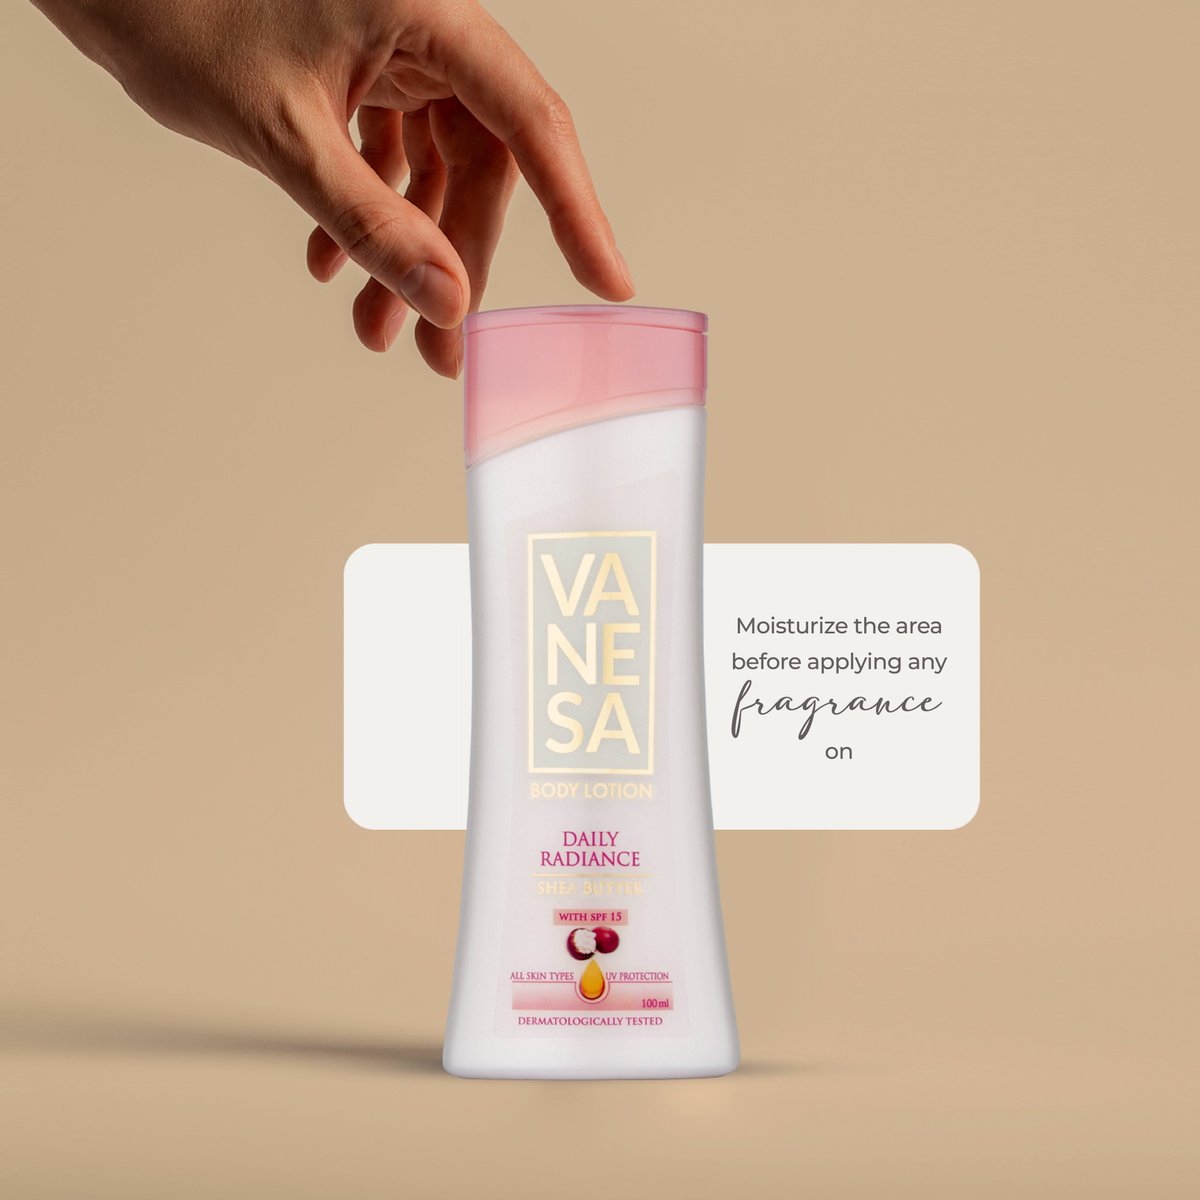 Moisturize your skin to keep it smooth and supple with Vanesa Daily Radiance body lotion. It hydrates and nourishes your skin while providing UV protection at the same time and making you look radiant. Love Your Self Love Vanesa #vanesabeauty #vanesaSkincare #Vanesa #Bodylotion